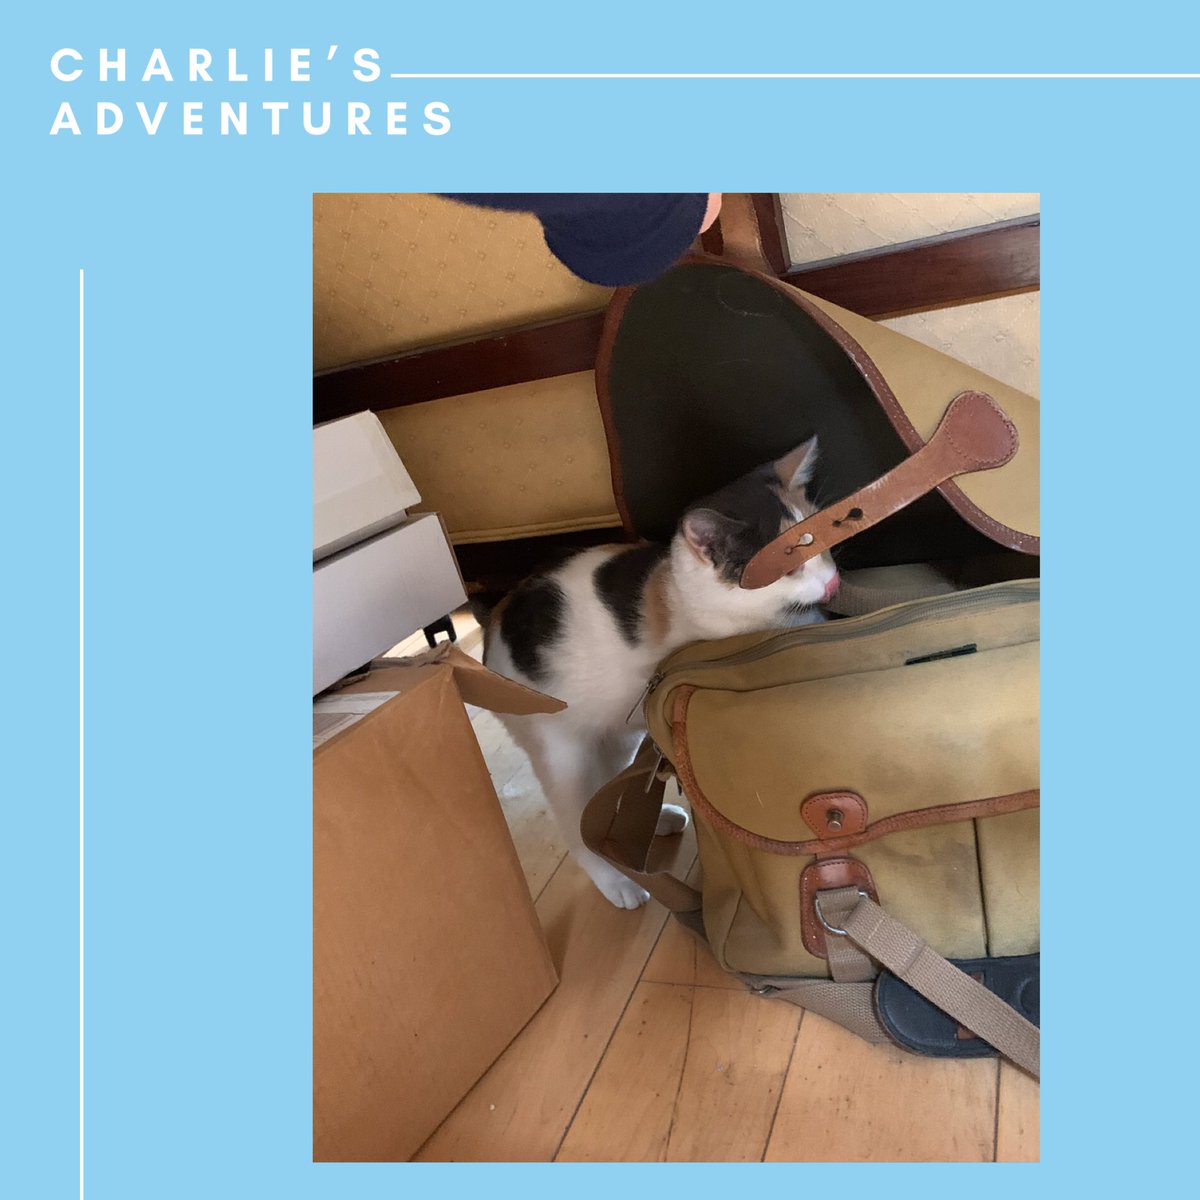 We know you all love your weekly Charlie update. Here he is getting into a bit of mischief. #CatsinPublishing #CatsofTwitter #CharliesAdventures